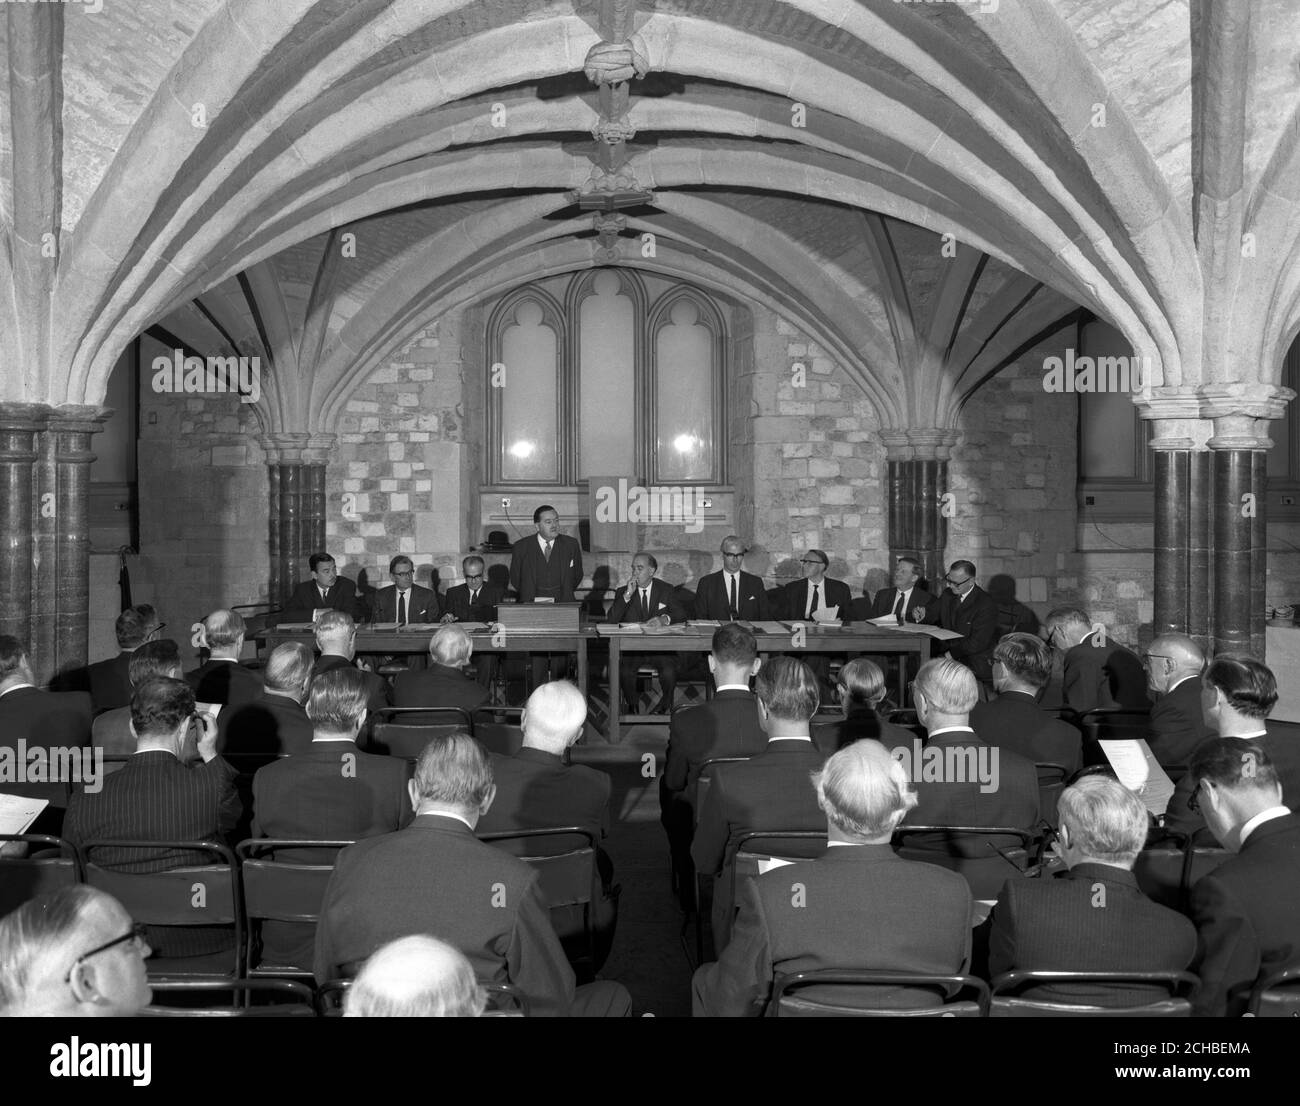 An historic setting - the Crypt beneath the Guildhall, London, for the 100th annual general meeting of the Press Association, Britain's national news agency, which is celebrating its centenary. The chairman of PA, W.D. Barnetson, is seen addressing the meeting. Stock Photo